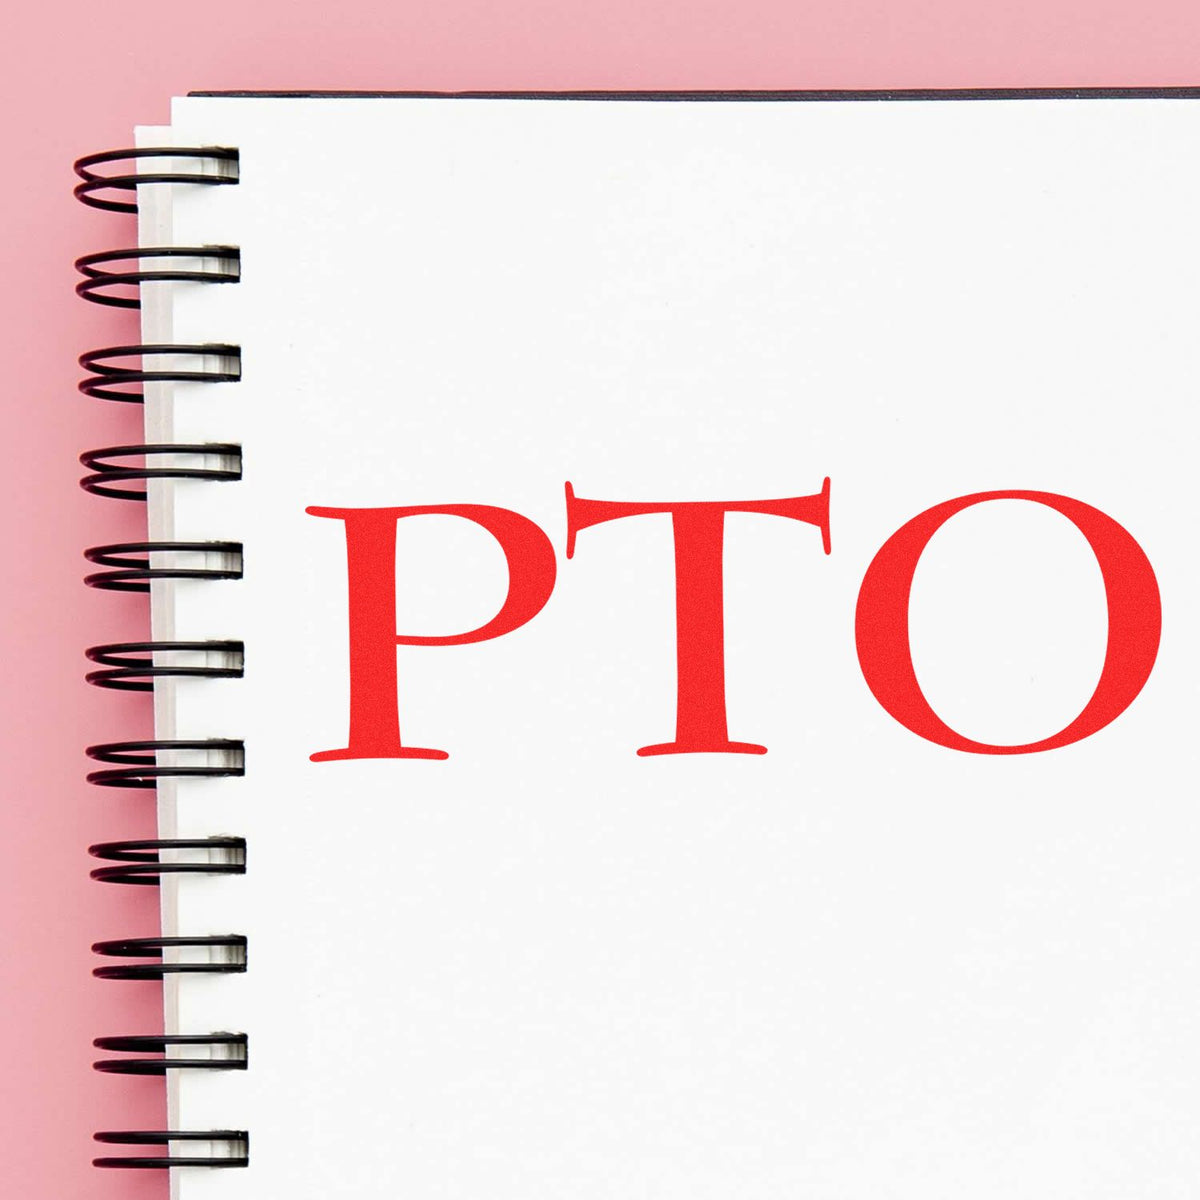 Large PTO Rubber Stamp In Use Photo